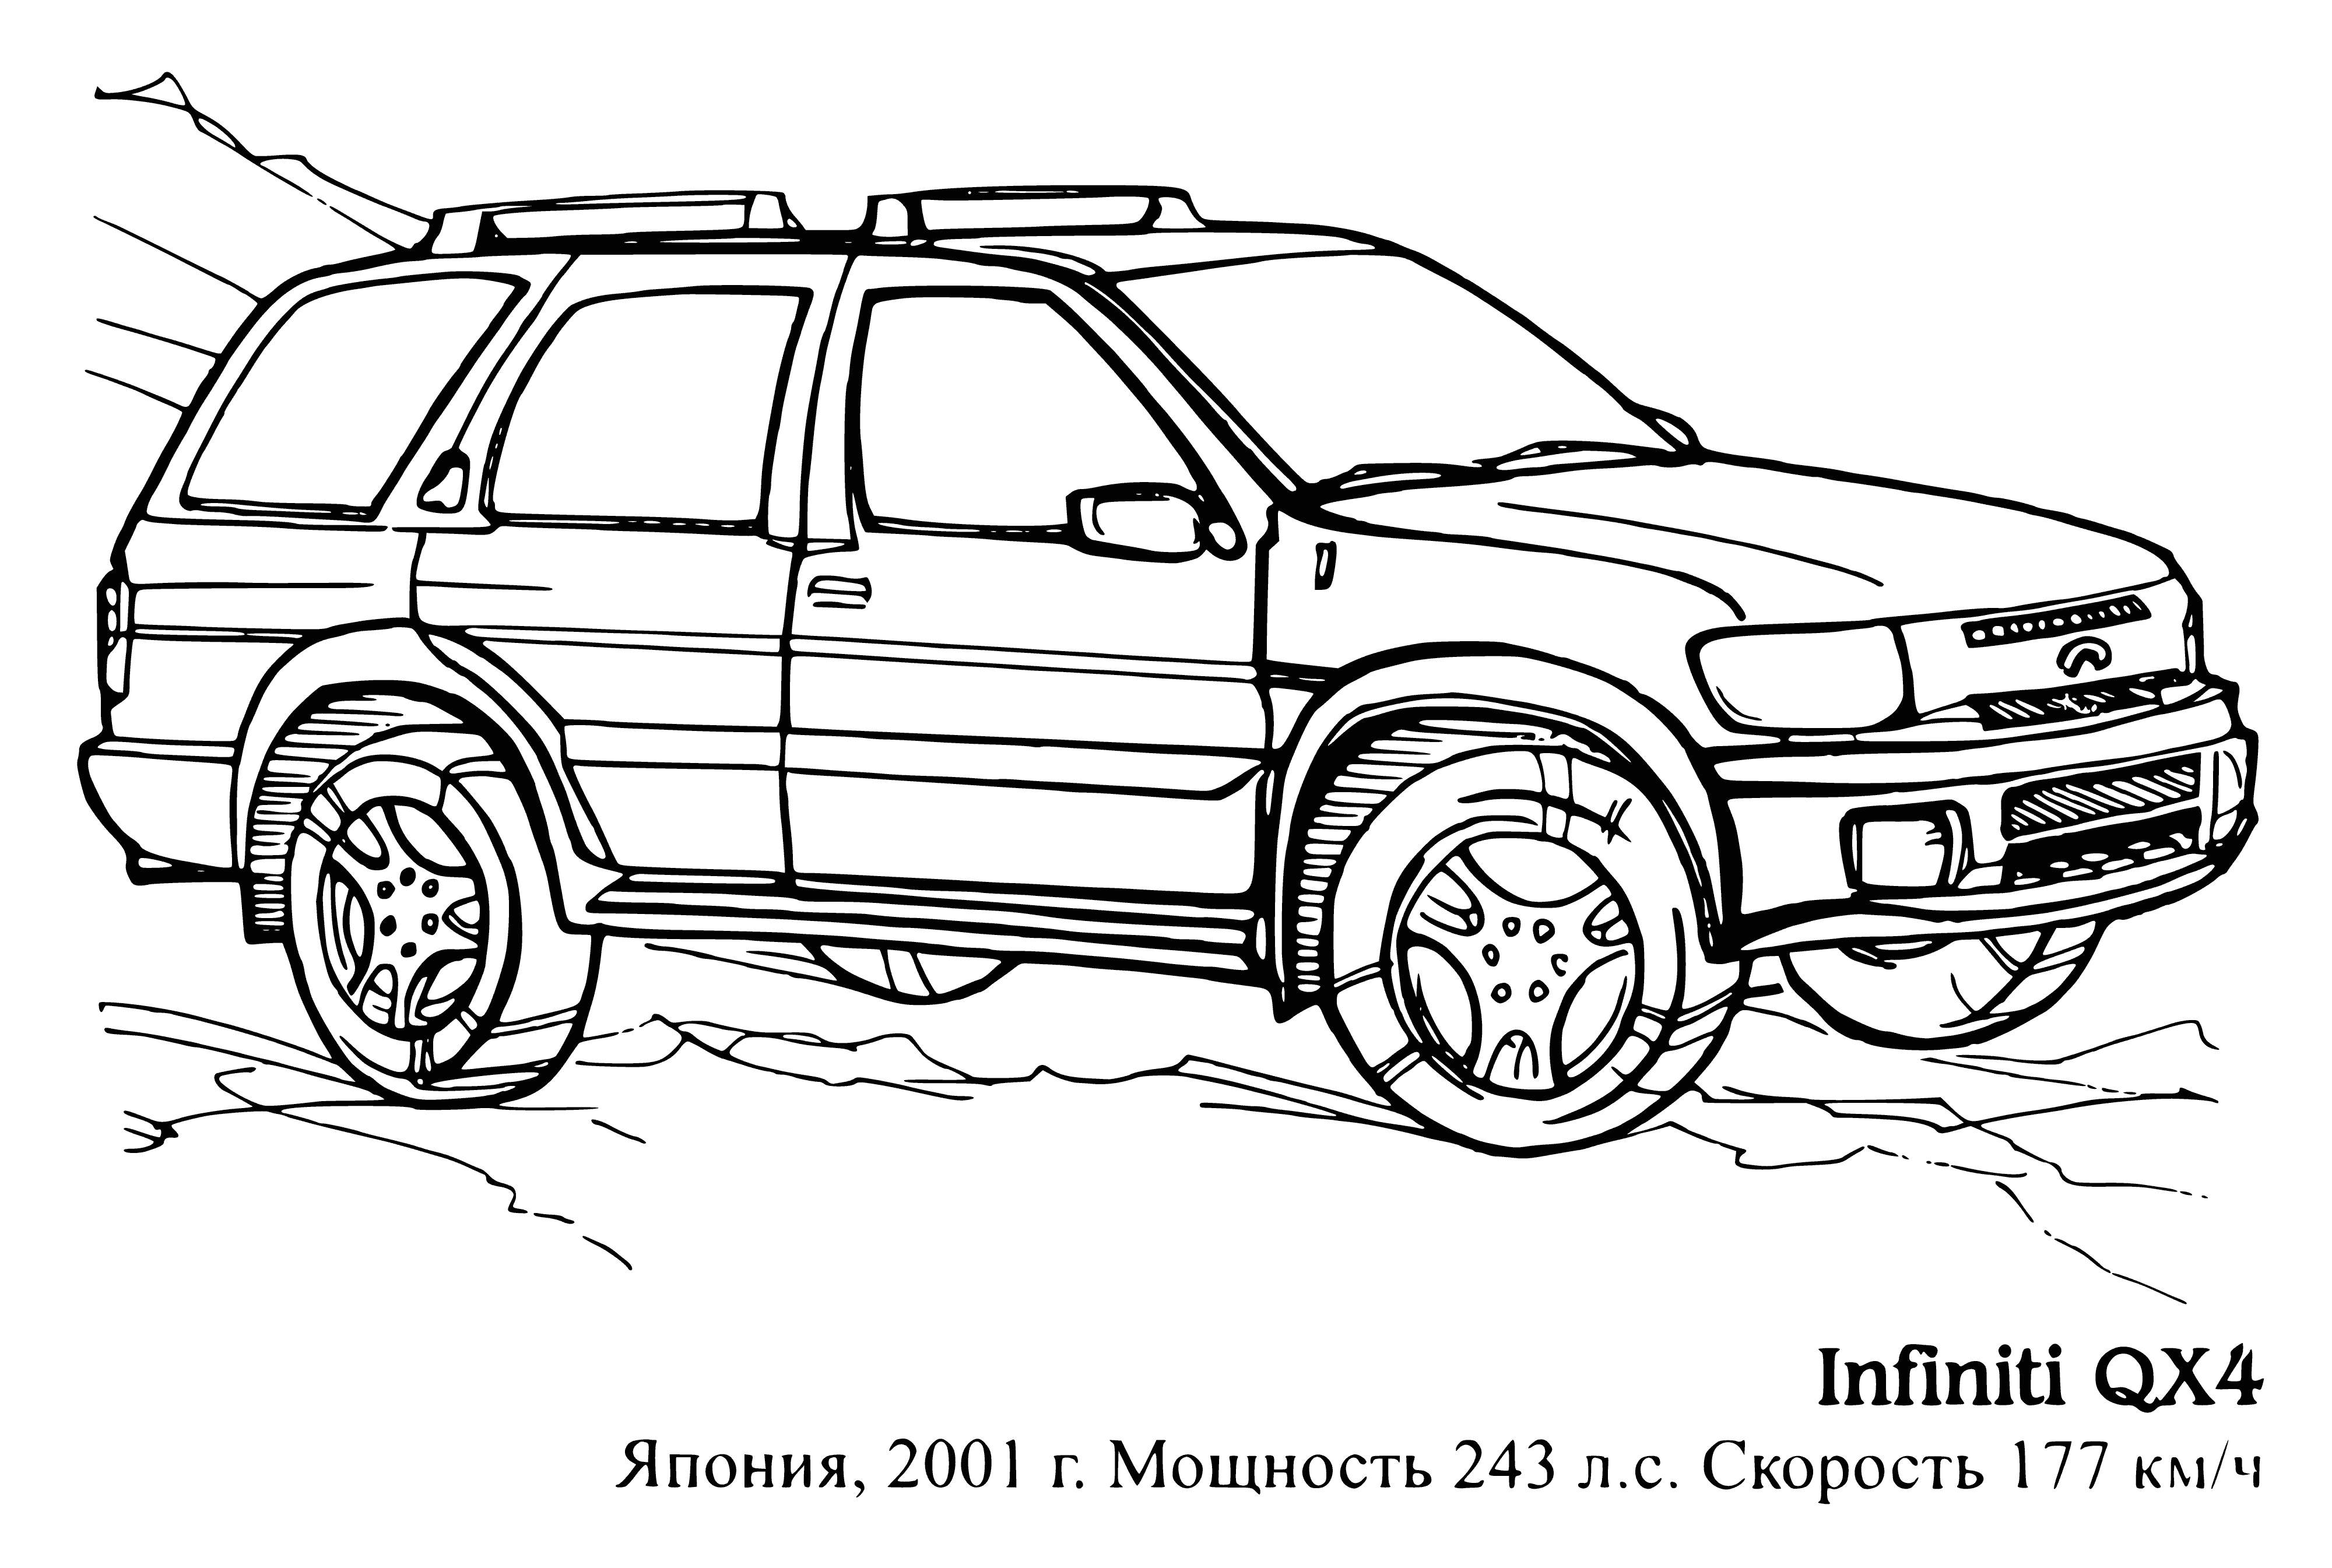 coloring page: The QX4 was Infiniti's first SUV, released prior to the Nissan Pathfinder. It featured a luxurious interior, a prominent chrome grille, and a 245 horsepower engine.